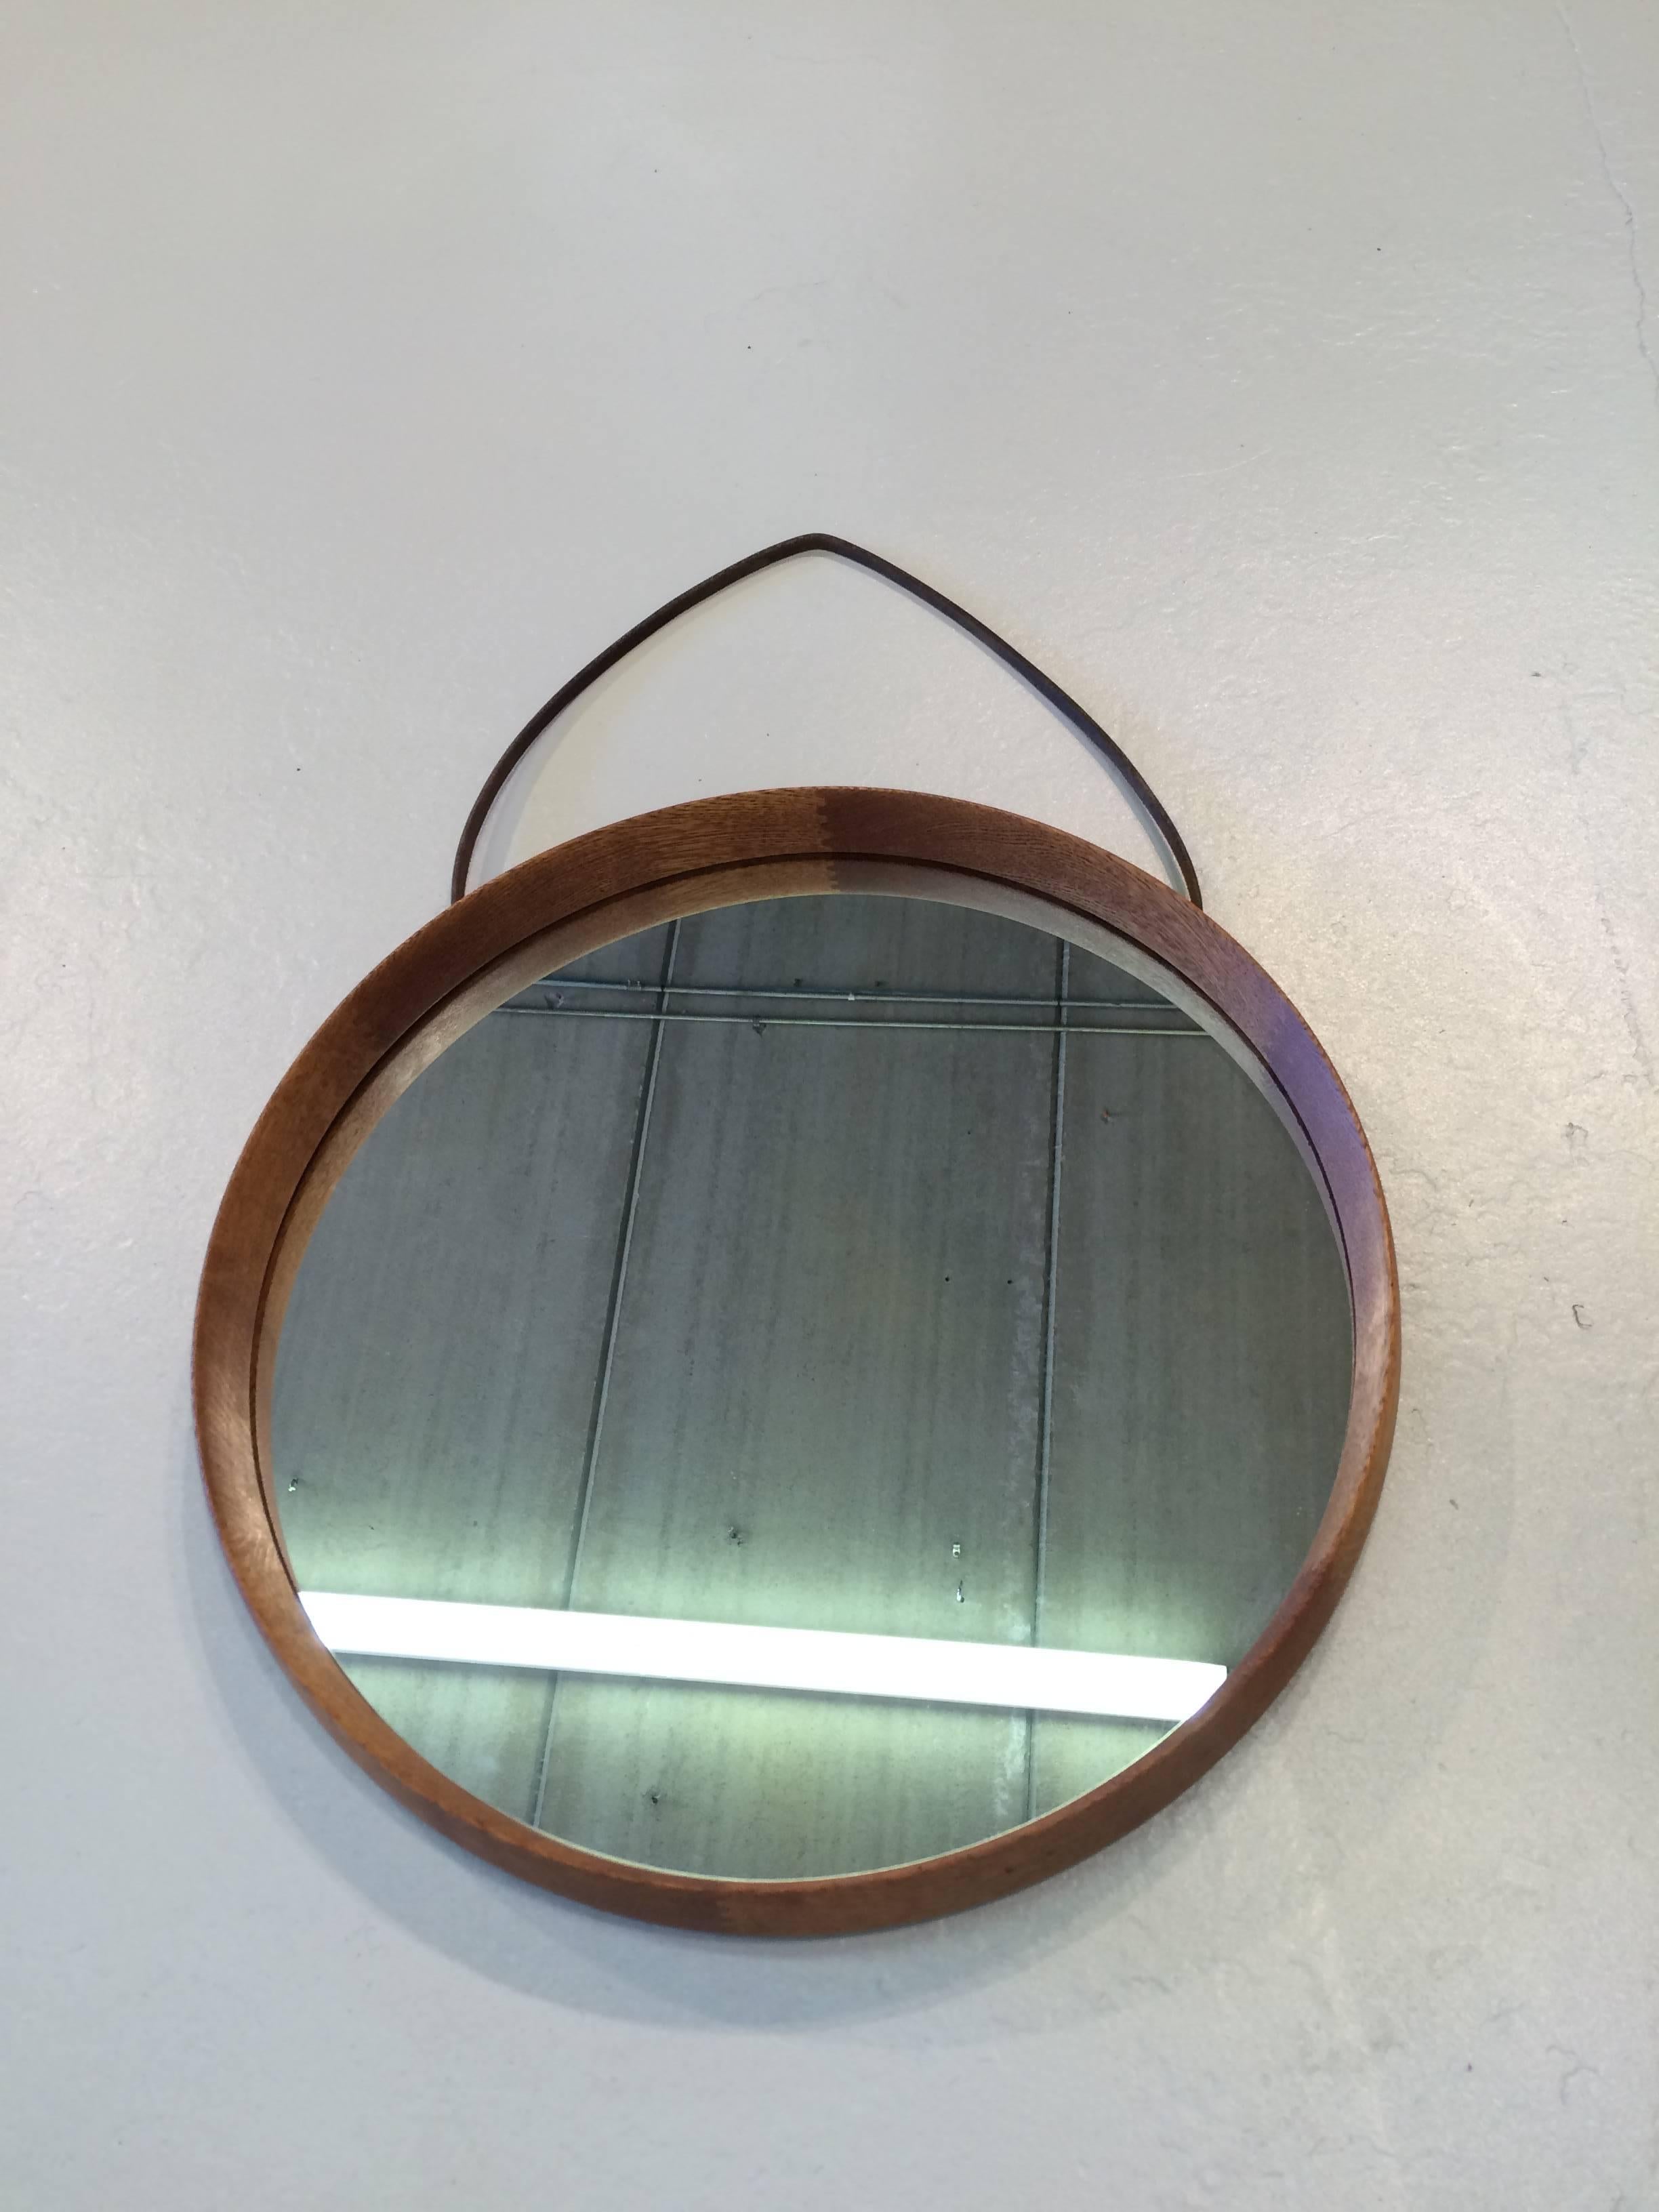 Round mirror in oak and leather designed by Uno & Osten Kristiansson. Produced by Luxus.